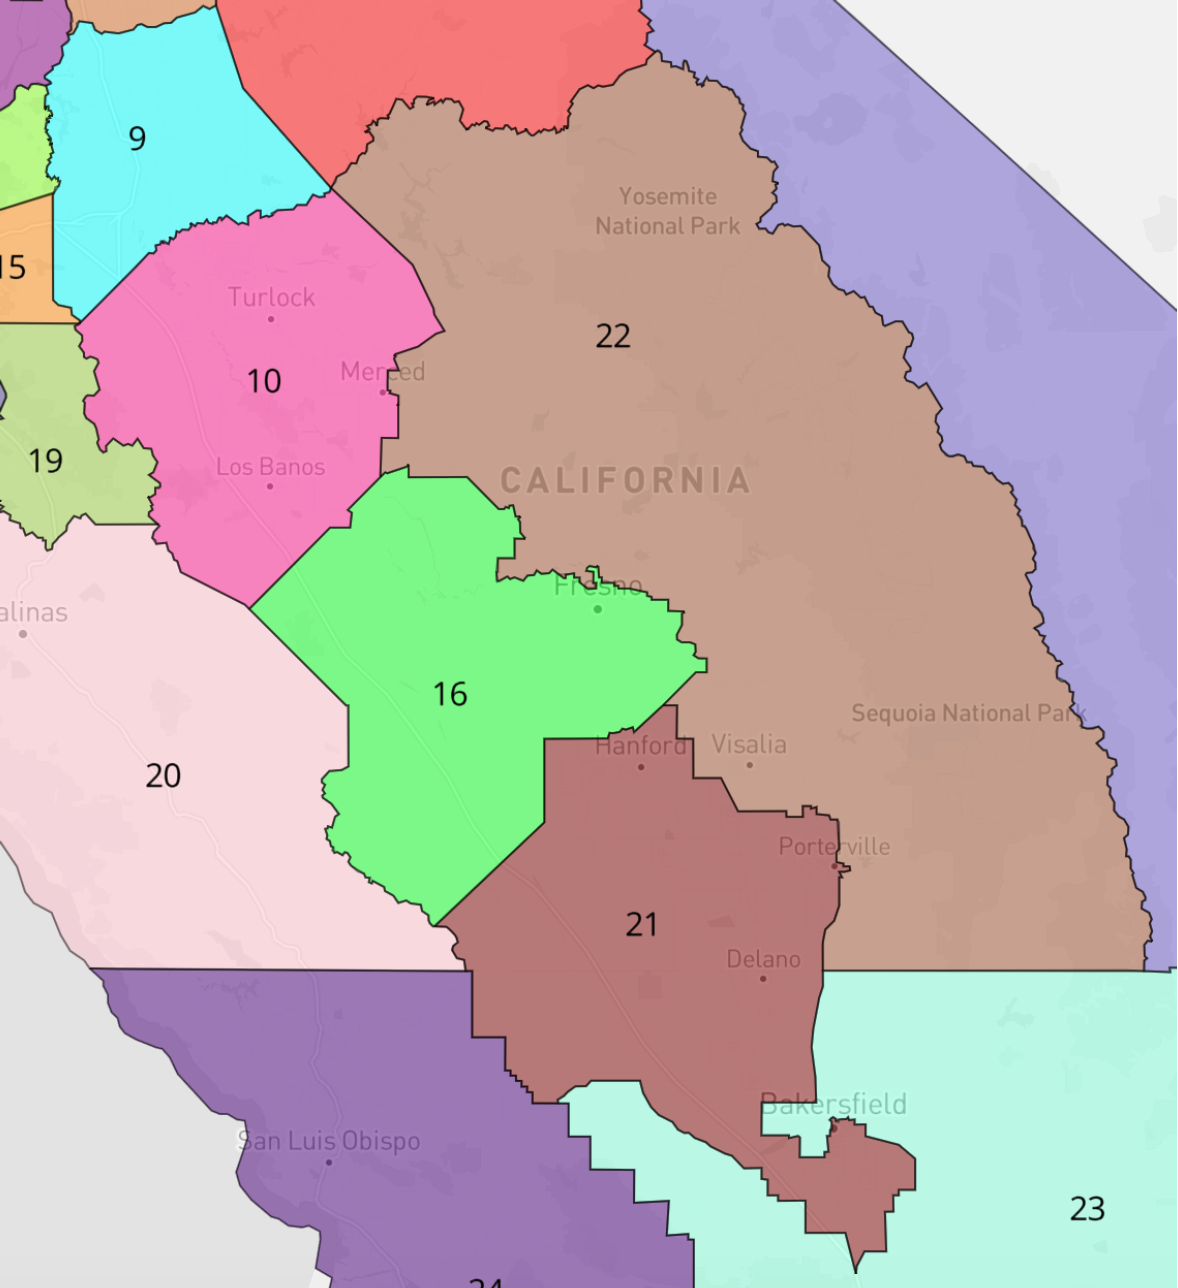 Shifting battle lines? Here's an early look at Calif. Congressional districts in 2022.